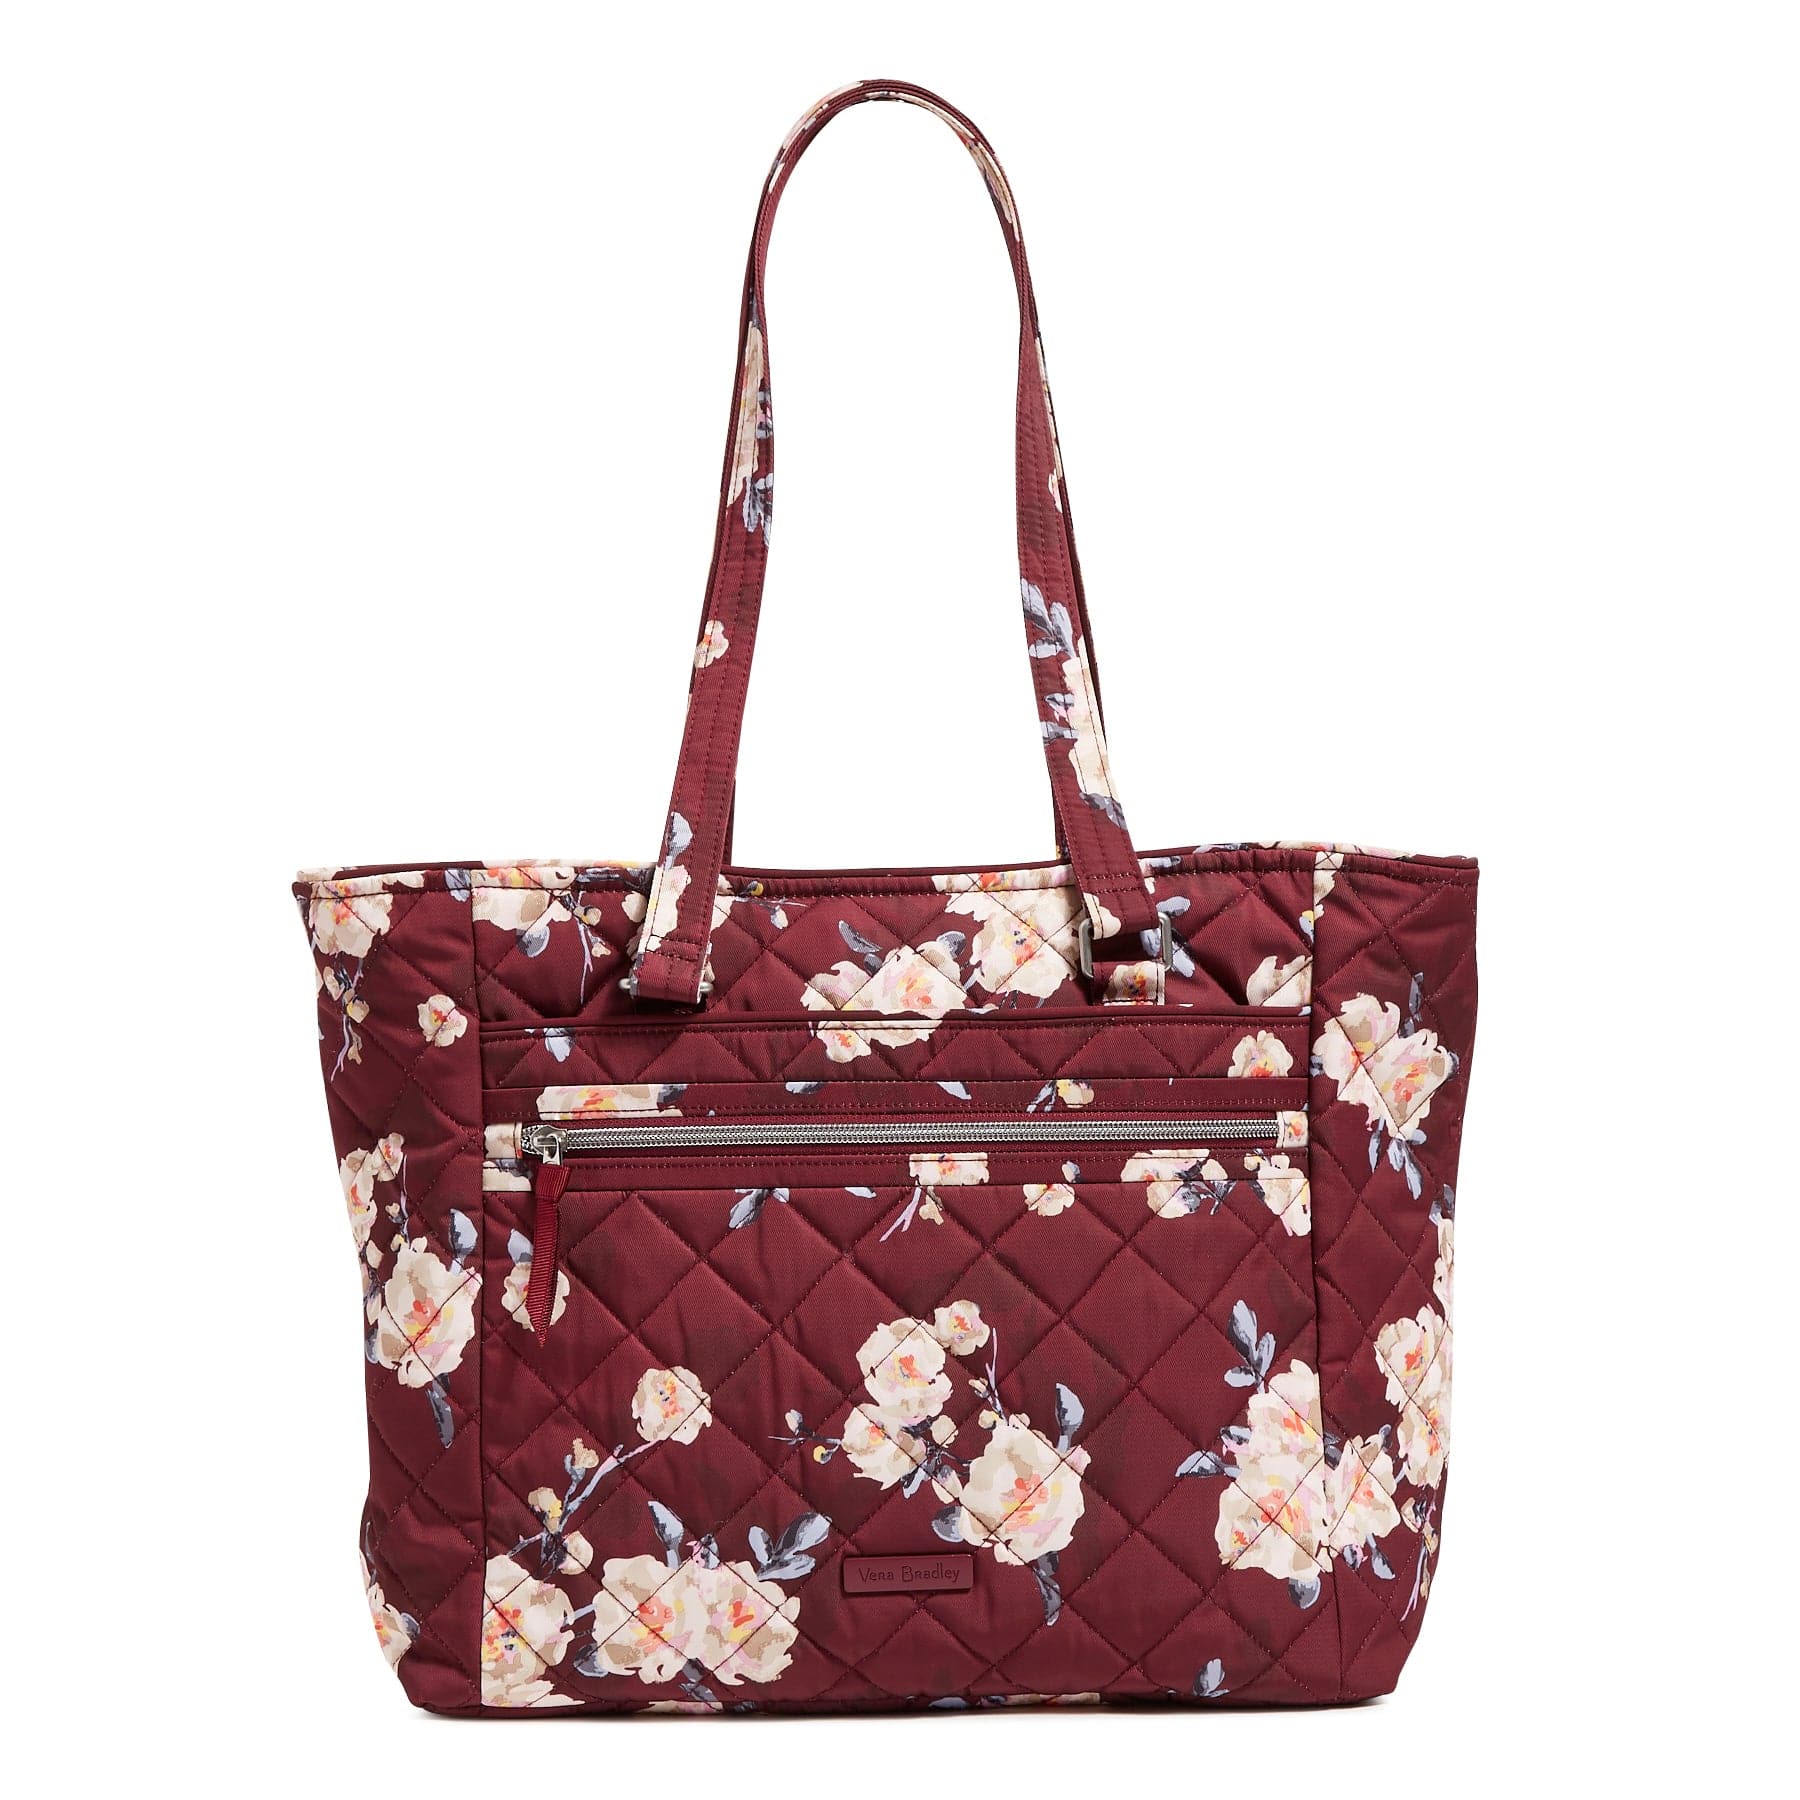 Work Tote Bag-Blooms and Branches-Image 1-Vera Bradley